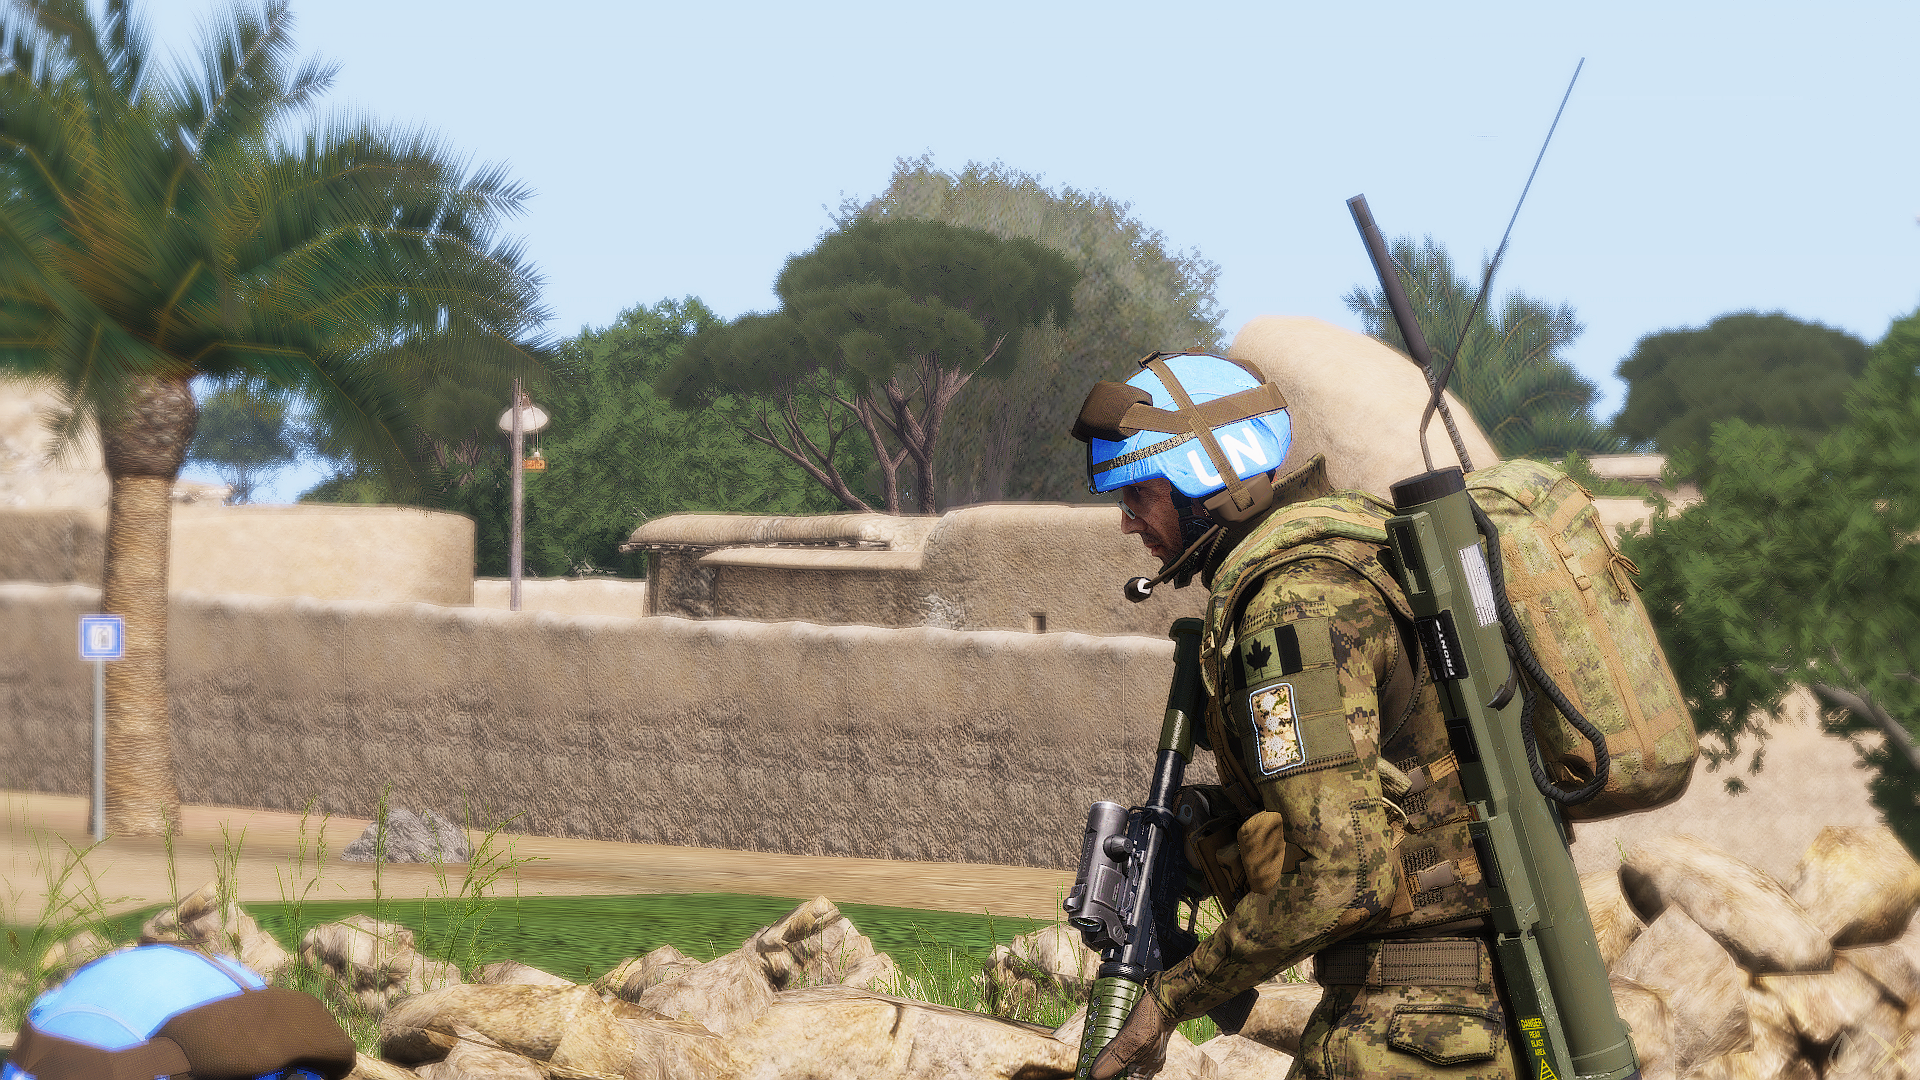 Canadian peacekeepers conduct patrols in the surrounding towns (FICTIONAL)